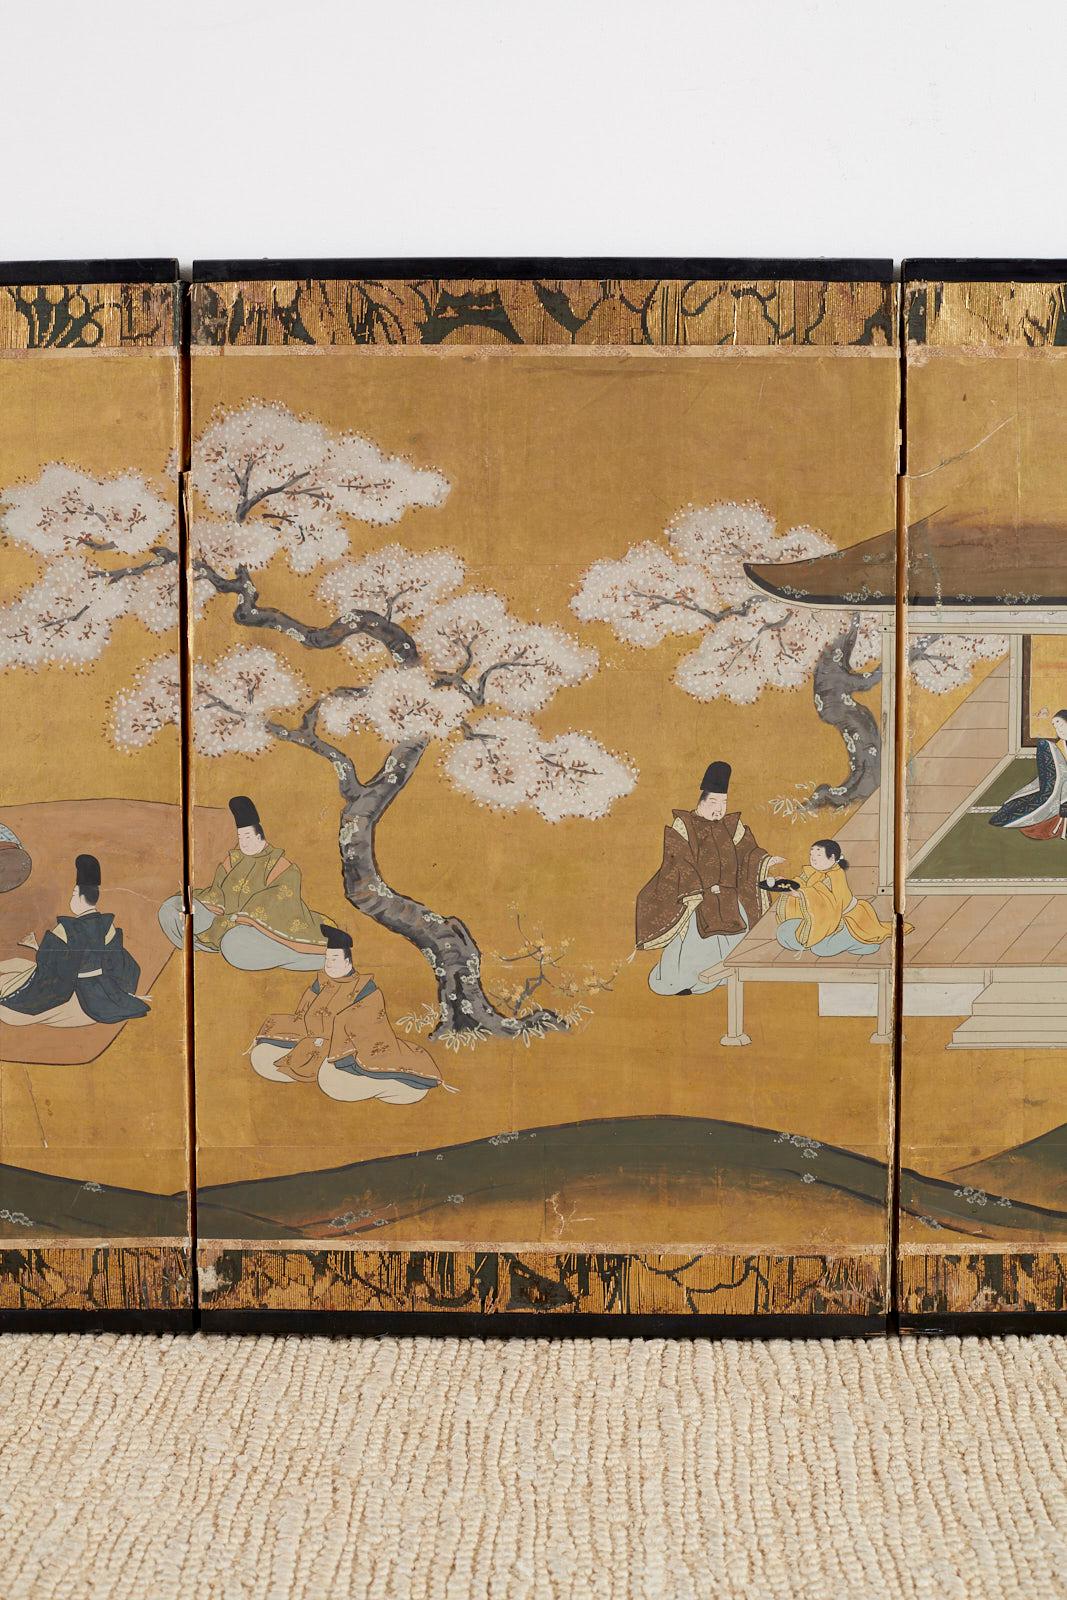 Hand-Crafted Japanese Four Panel Tales of Genji Picnic Screen